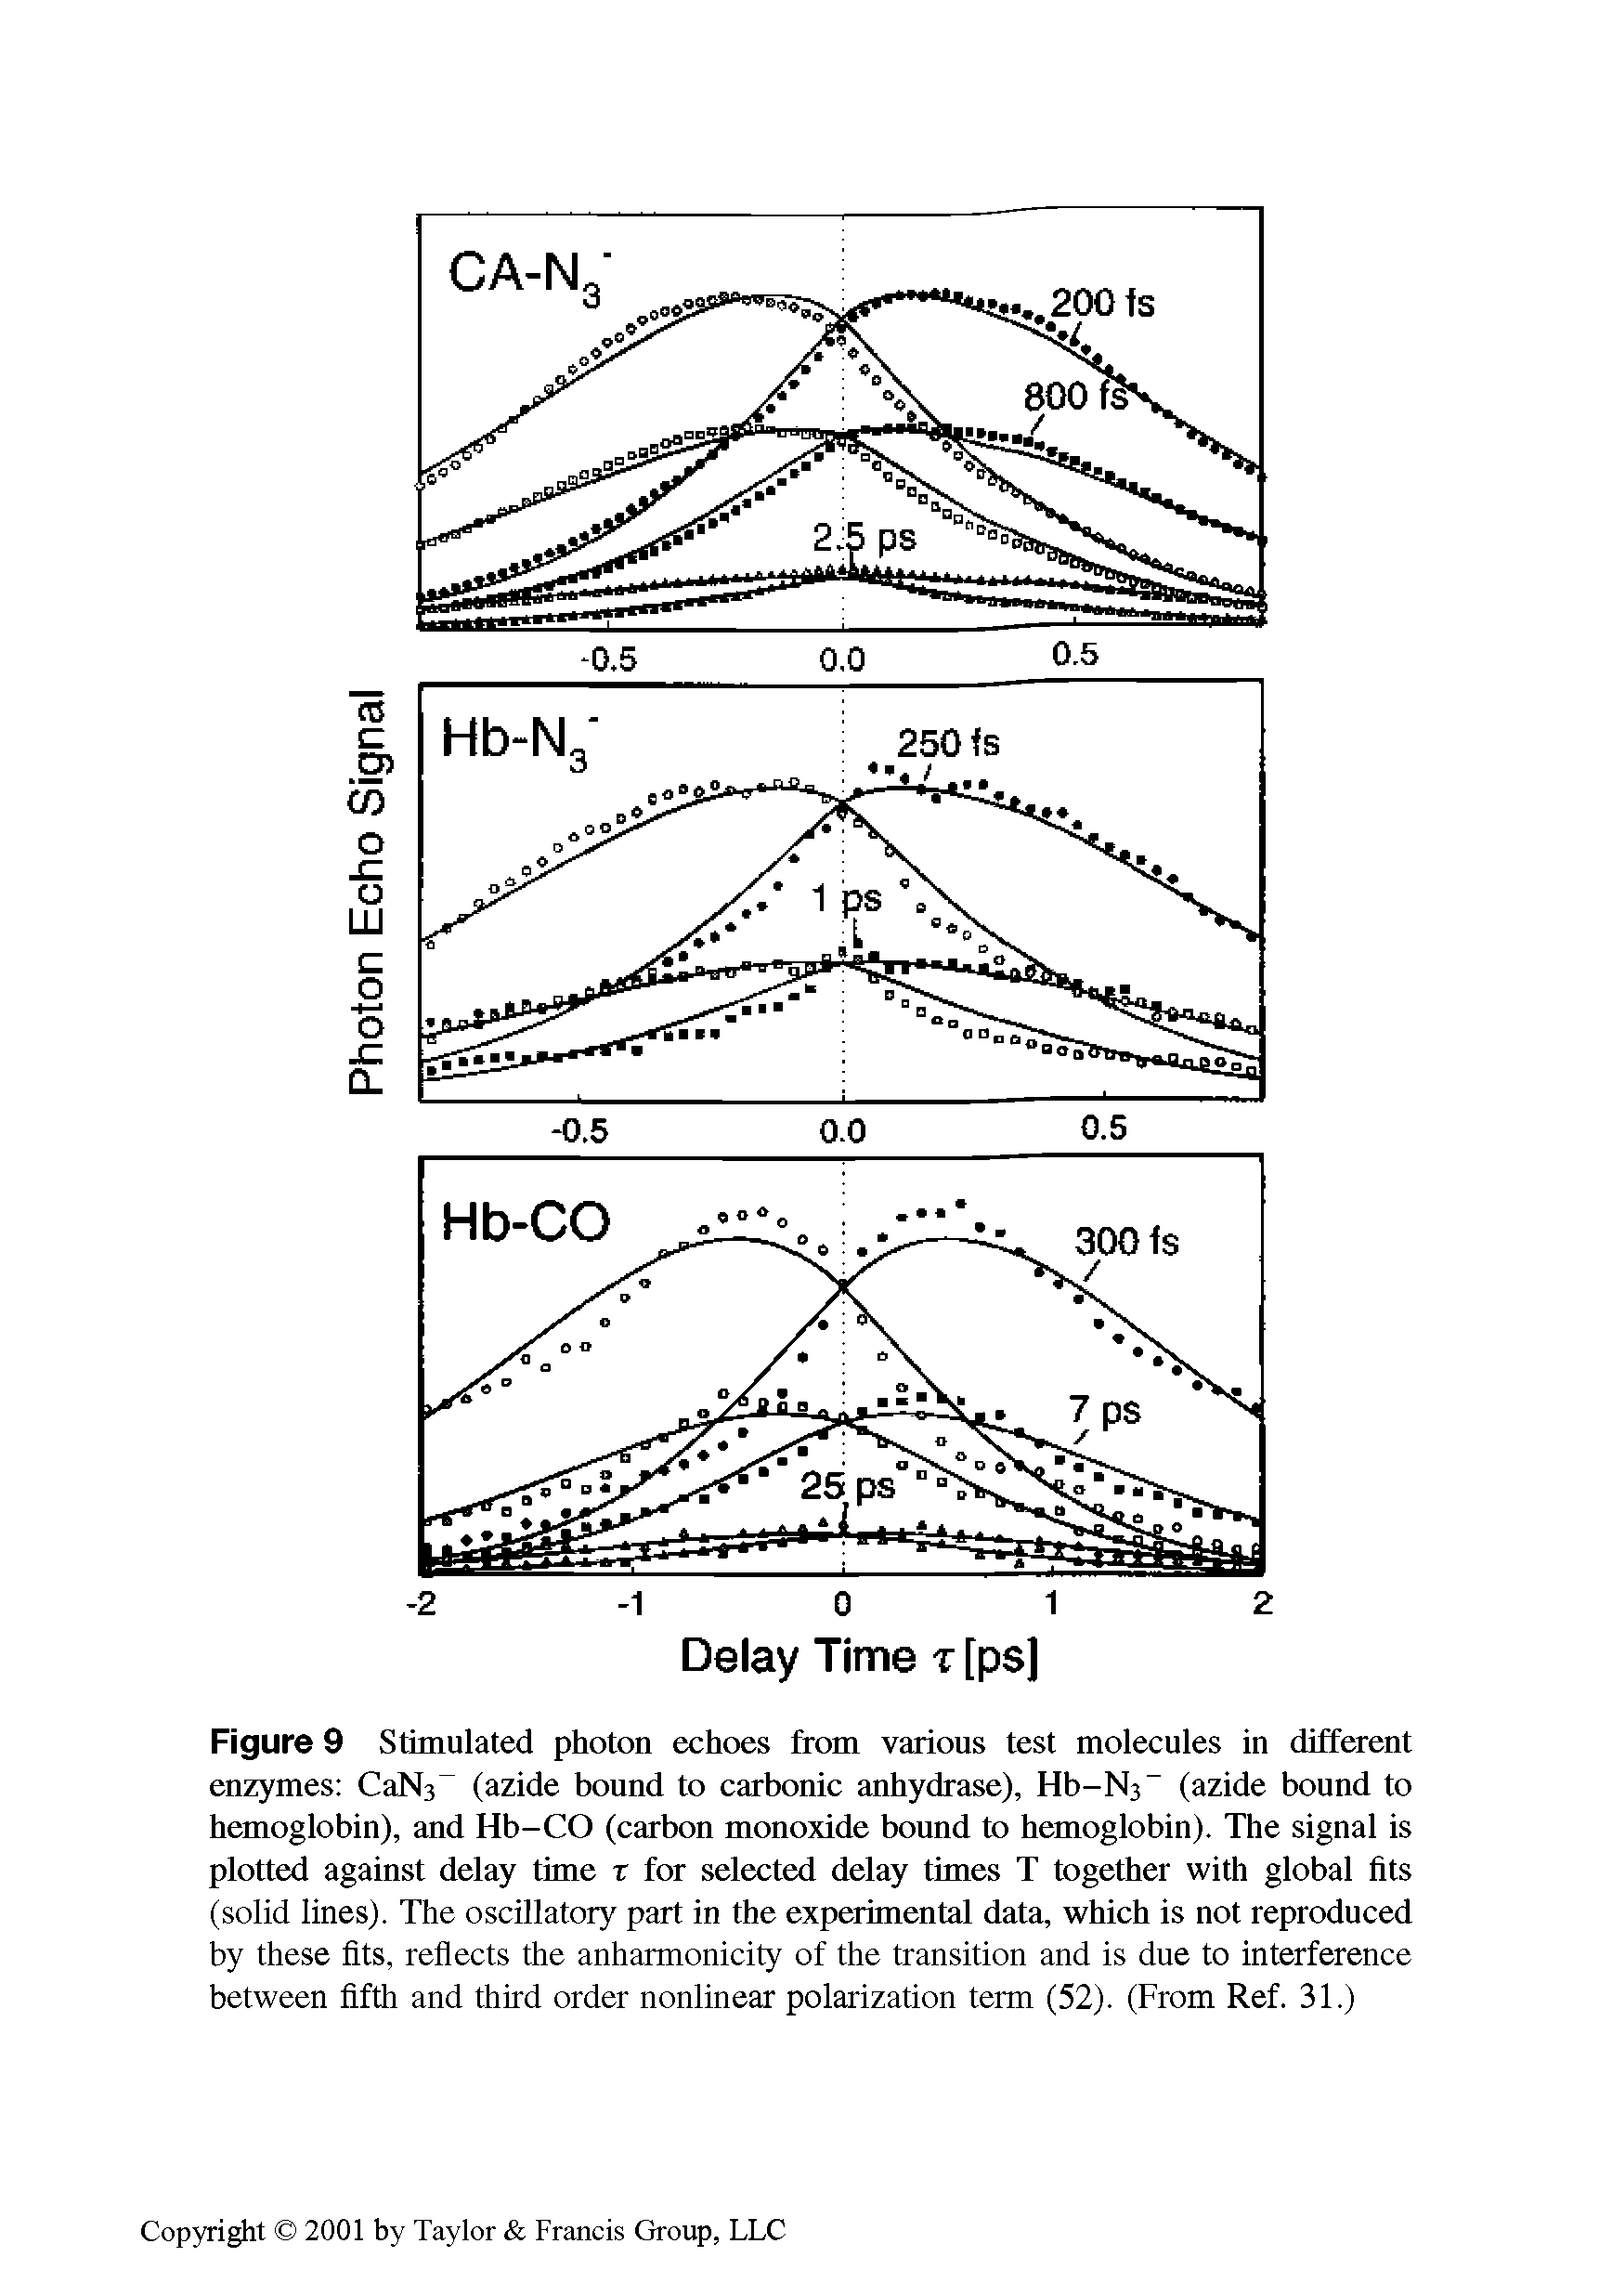 Figure 9 Stimulated photon echoes from various test molecules in different enzymes CaN-j (azide bound to carbonic anhydrase), Hb-lSb- (azide bound to hemoglobin), and Hb-CO (carbon monoxide bound to hemoglobin). The signal is plotted against delay time r for selected delay times T together with global fits (solid lines). The oscillatory part in the experimental data, which is not reproduced by these fits, reflects the anharmonicity of the transition and is due to interference between fifth and third order nonlinear polarization term (52). (From Ref. 31.)...